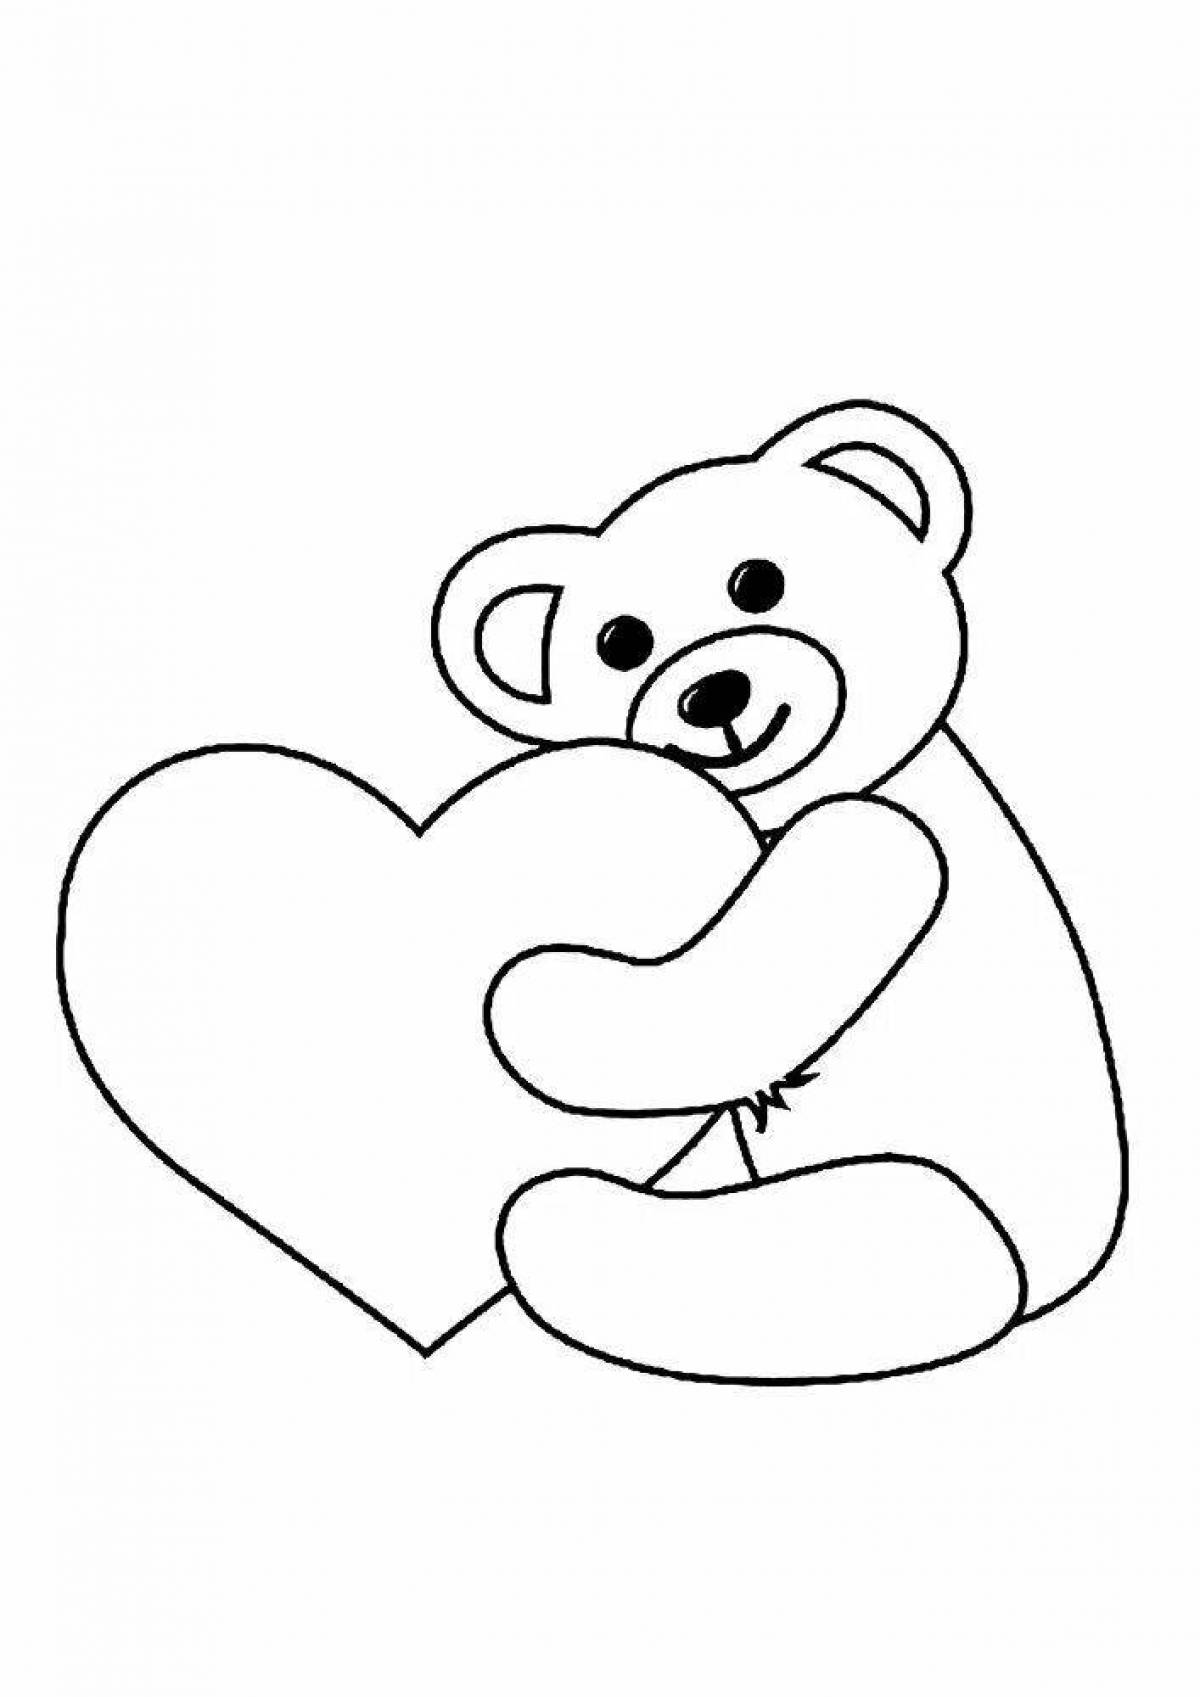 Coloring bright teddy bear with a heart